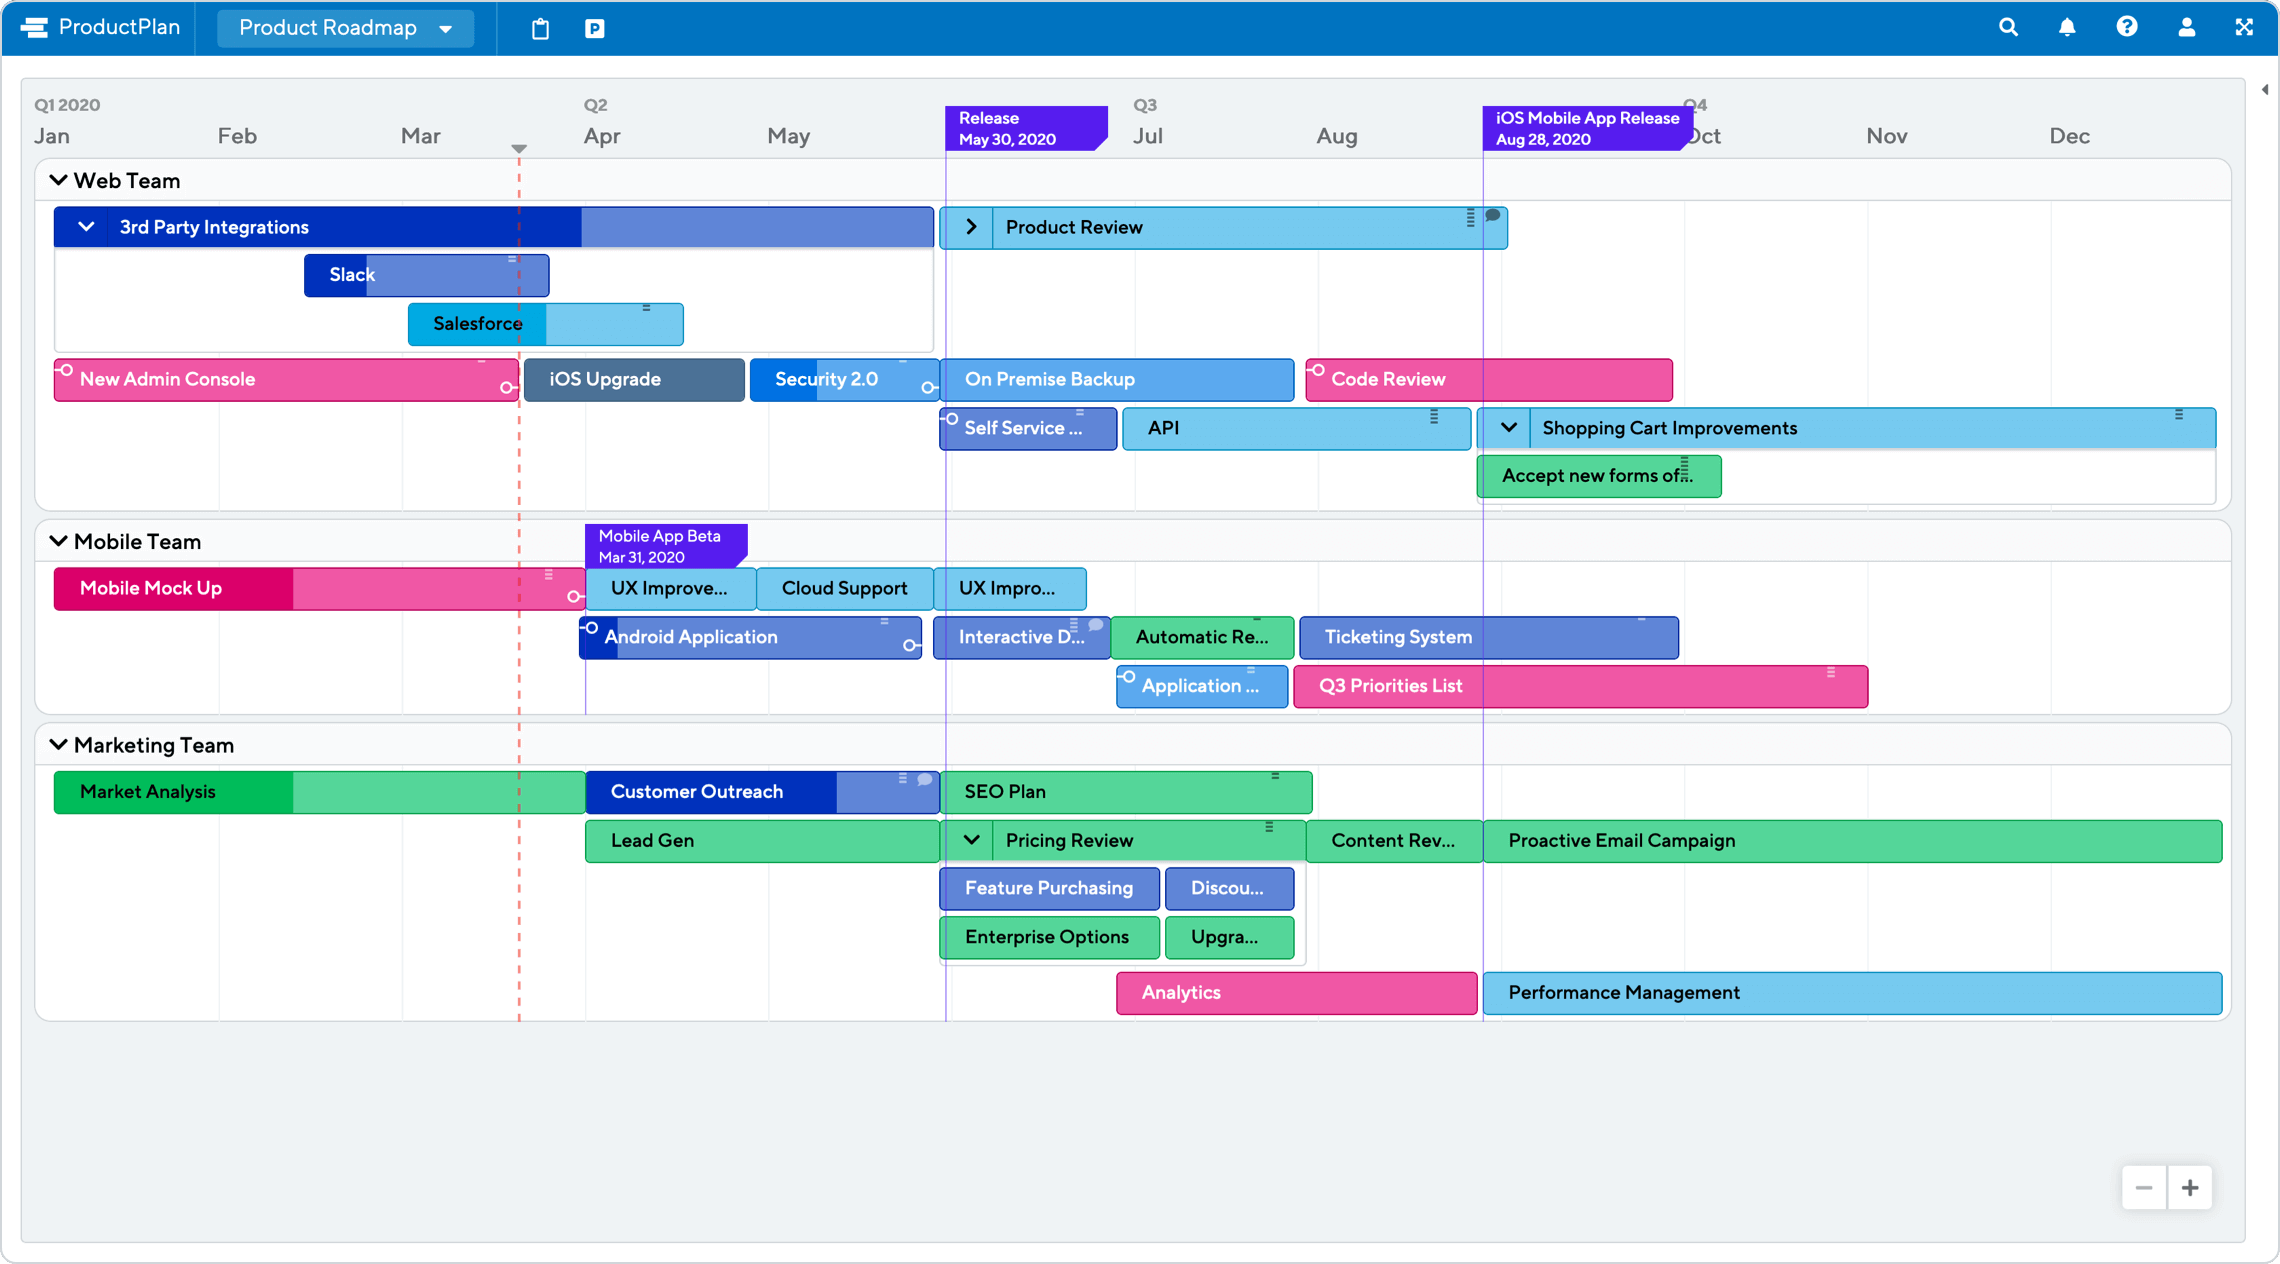 Free Product Roadmap Template [2020] Fully Customizable